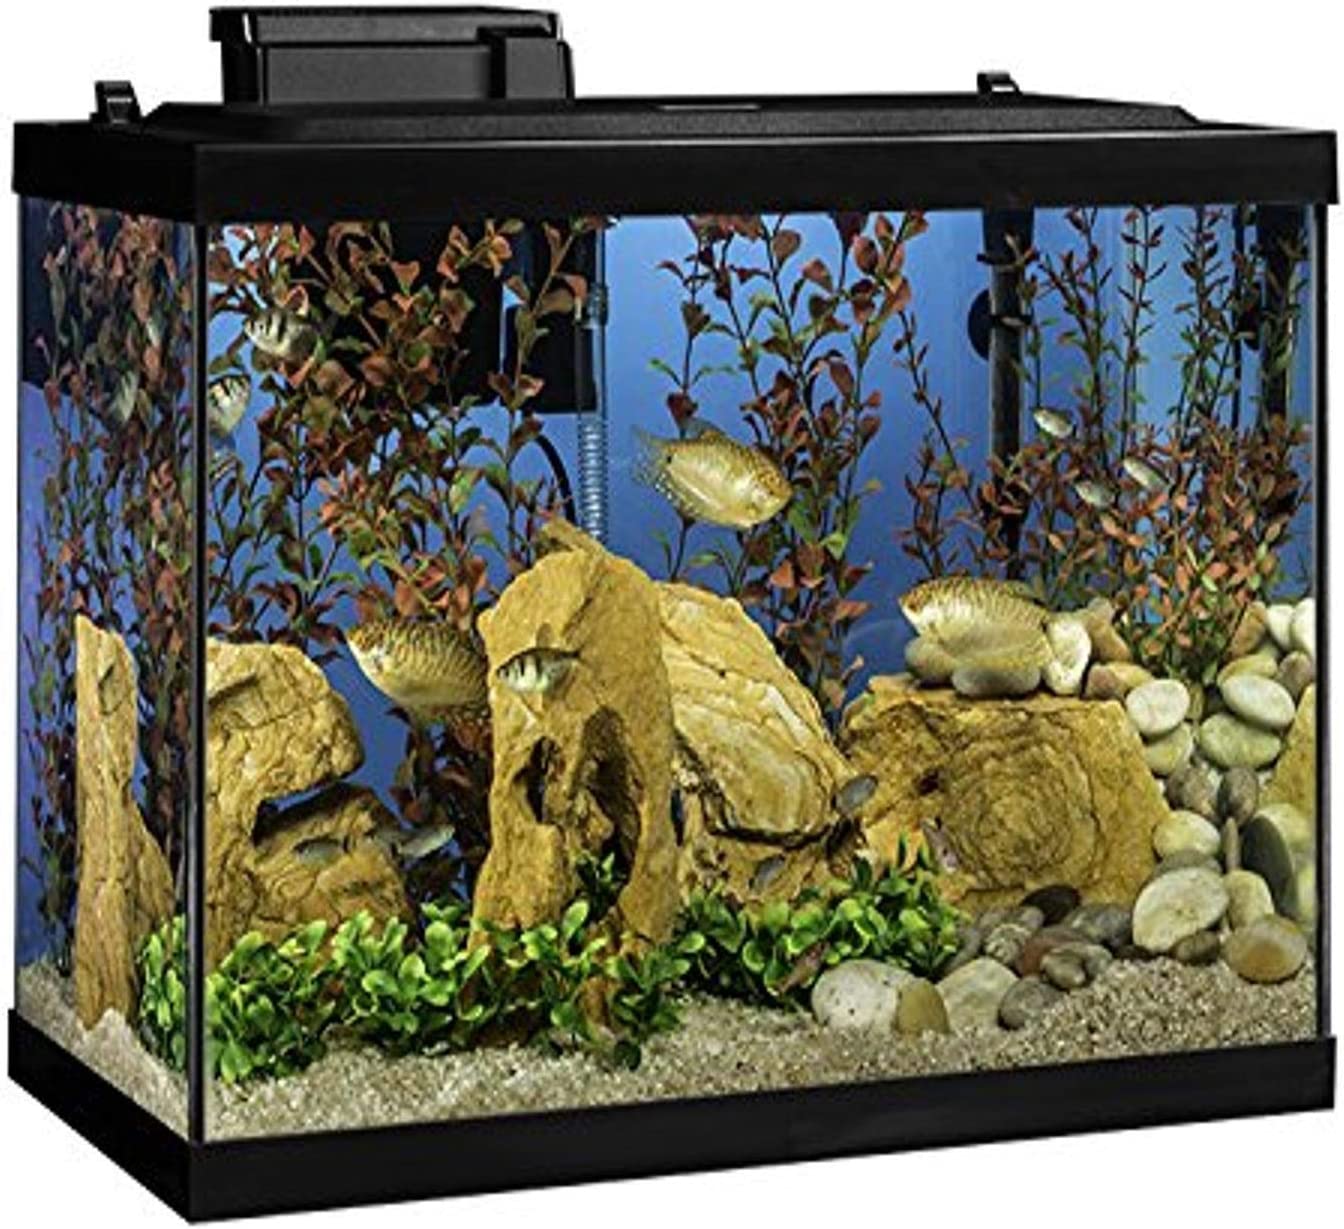 NV33230 Tetra Aquatic Turtle Deluxe Kit 20 Gallons 30 IN aquarium With Filter And Heating Lamps 